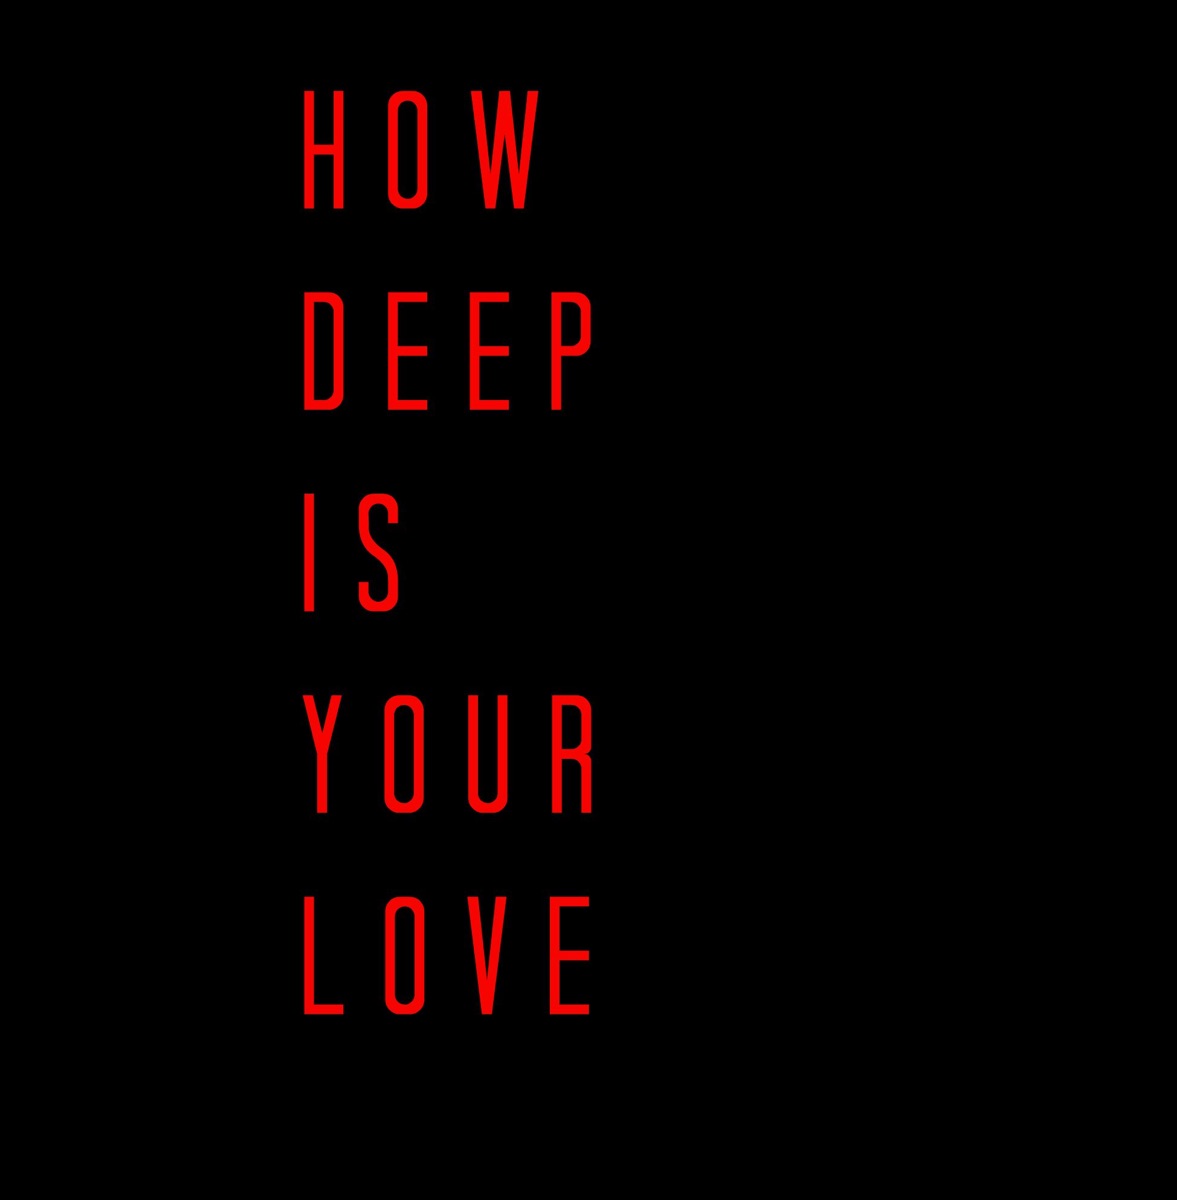 How Deep Is Your Love - song and lyrics by Calvin Harris, Disciples